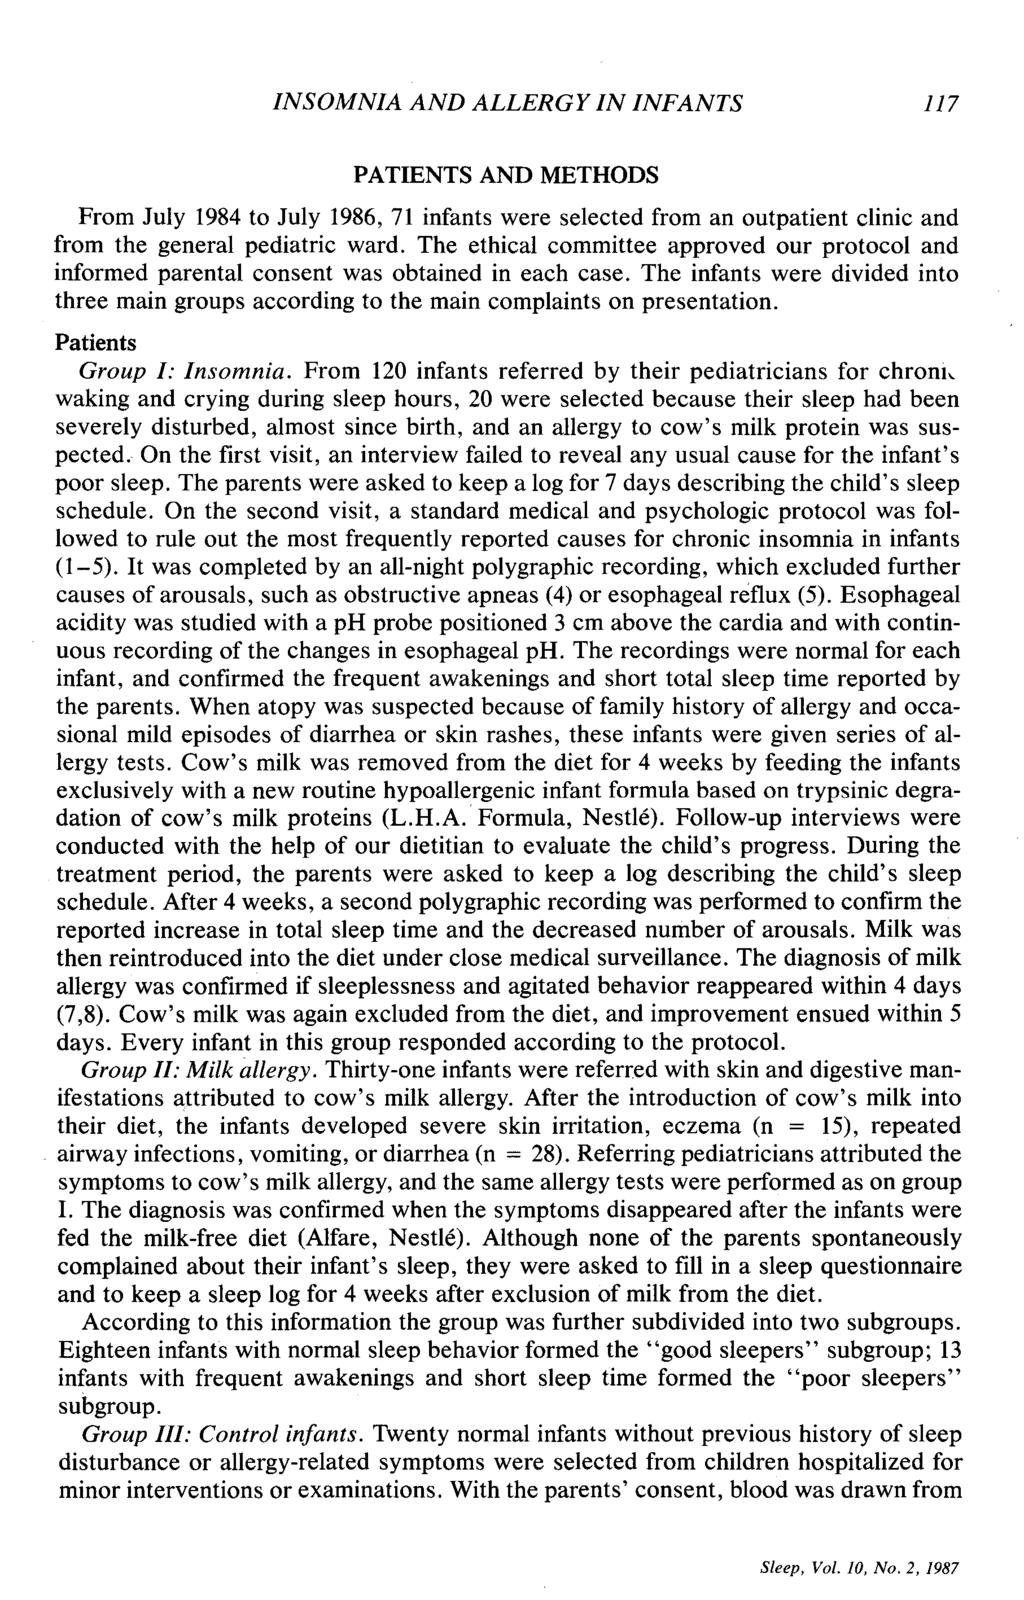 INSOMNIA AND ALLERGY IN INFANTS 1I7 PATIENTS AND METHODS From July 1984 to July 1986, 71 infants were selected from an outpatient clinic and from the general pediatric ward.